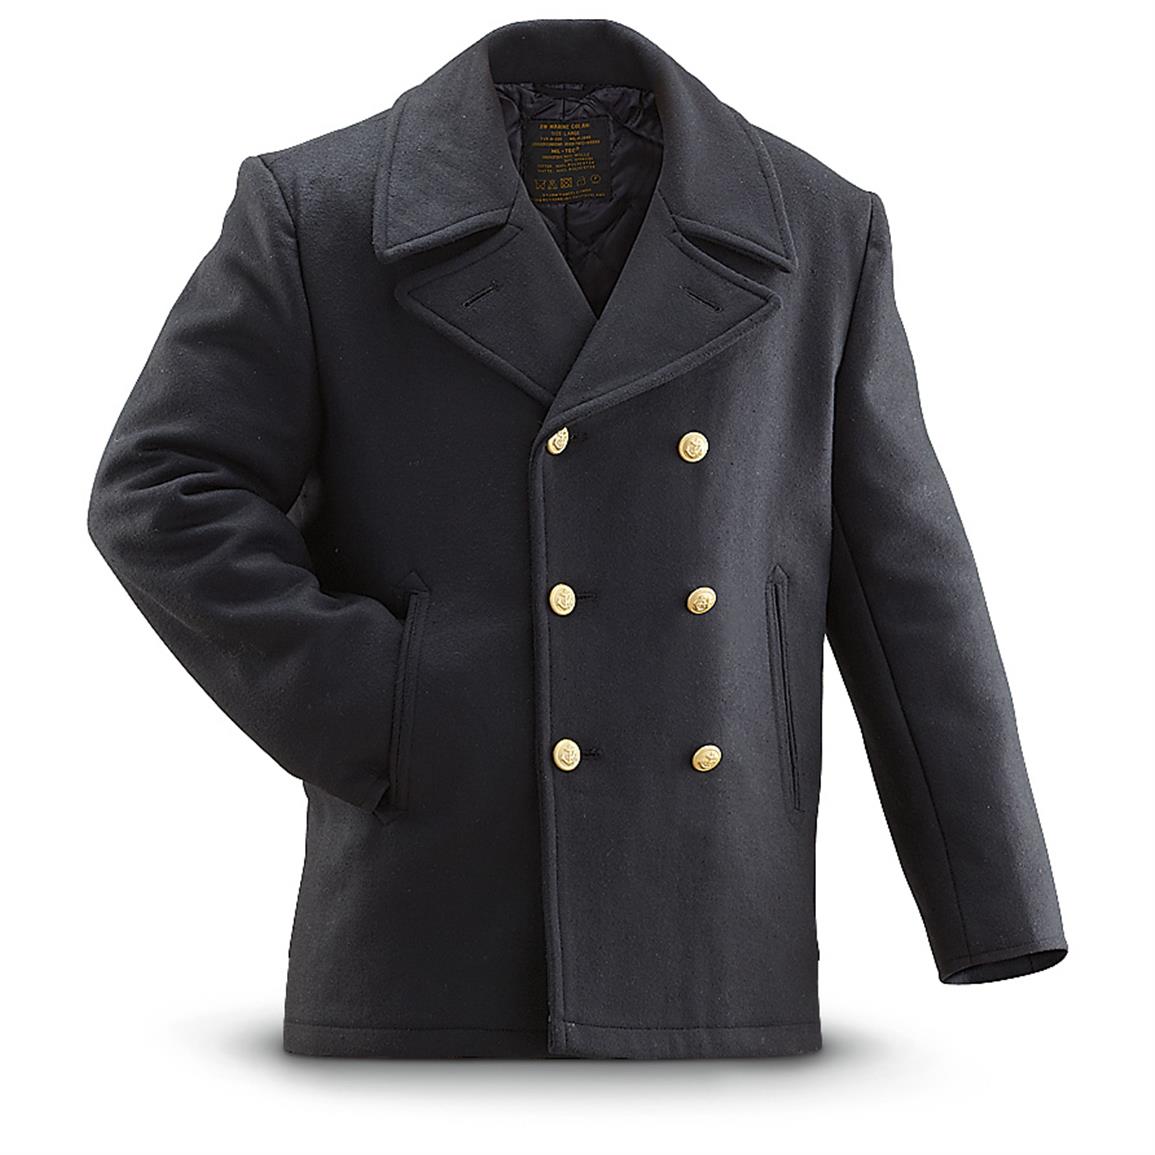 Mil-Tec Military Style Wool Pea Coat - 619093, Tactical Clothing ...